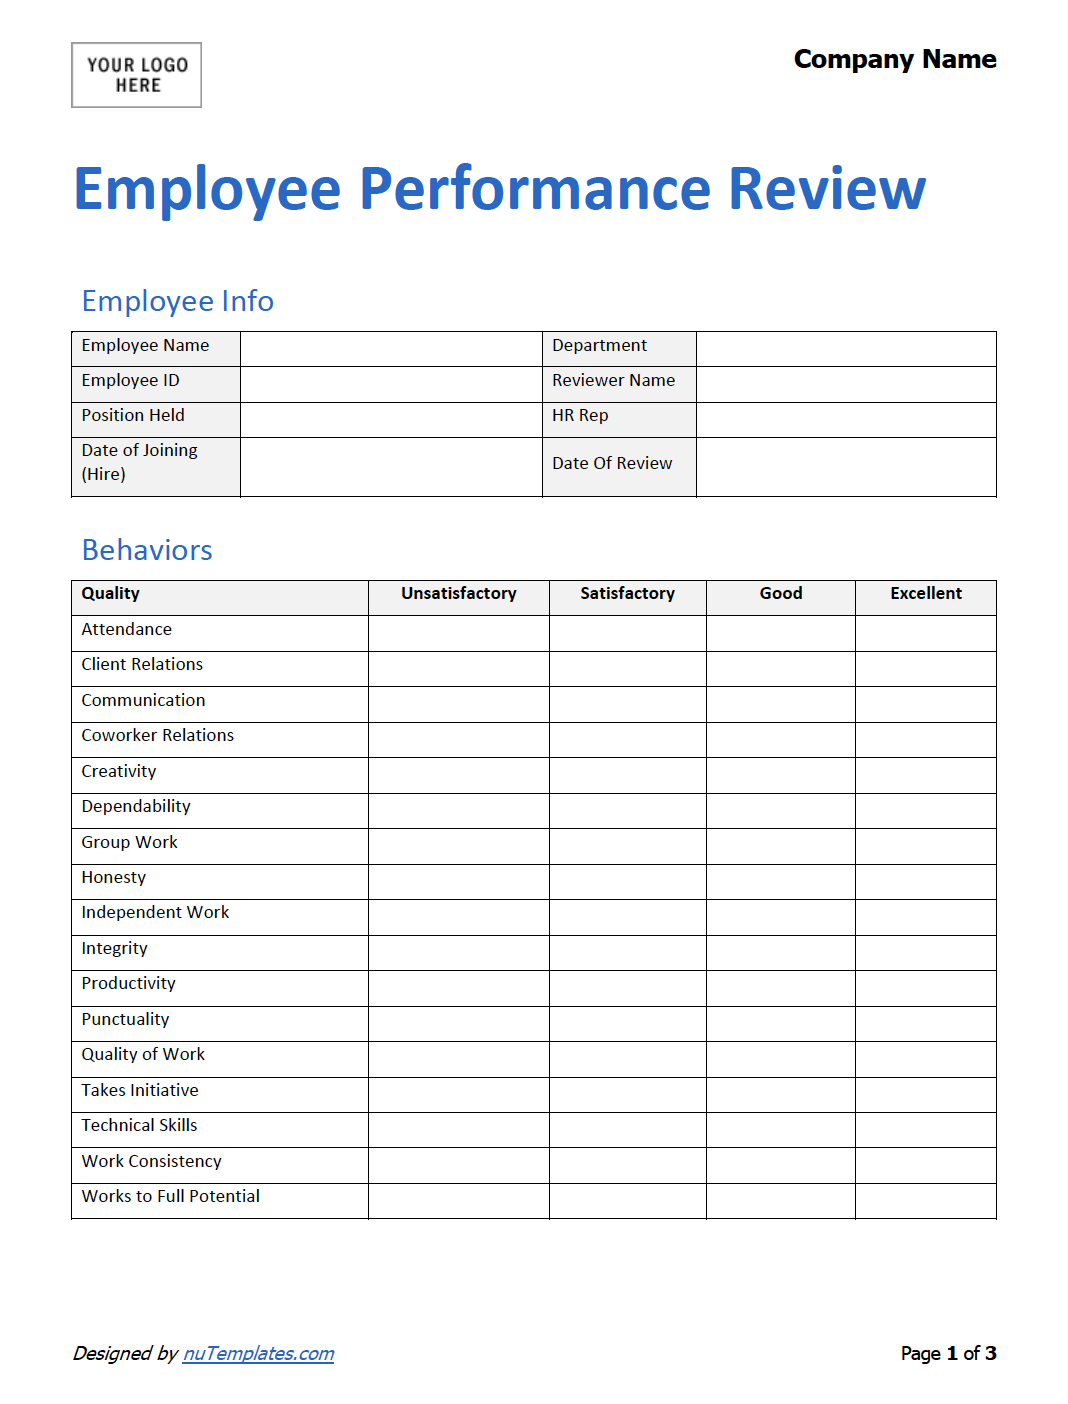 employee-performance-review-template-nutemplates-free-nude-porn-photos